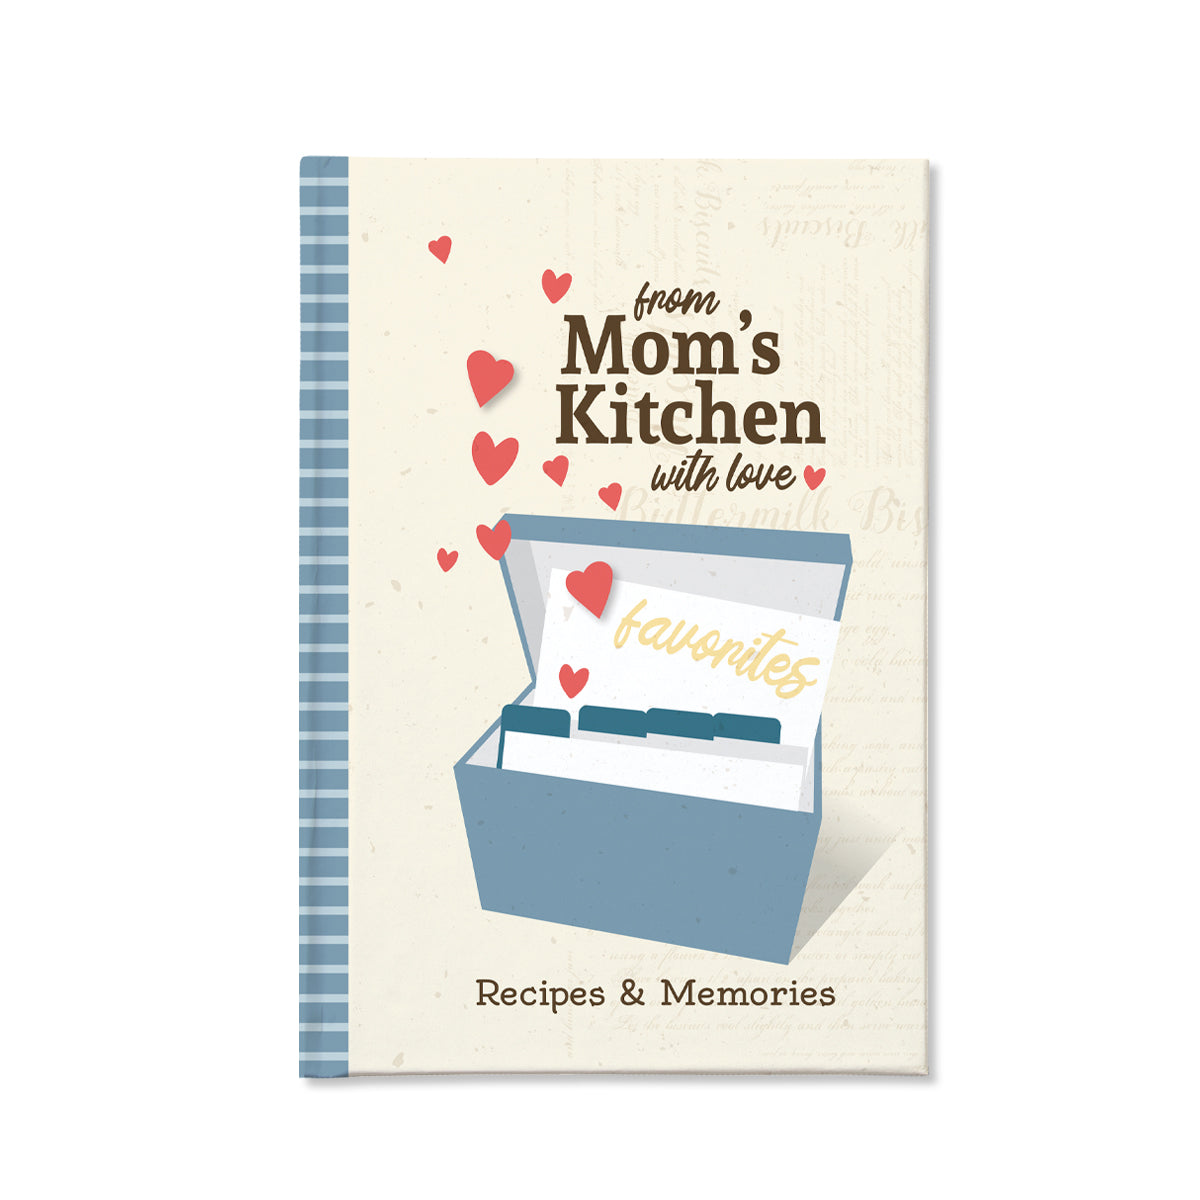 Front cover of "From Mom's Kitchen"